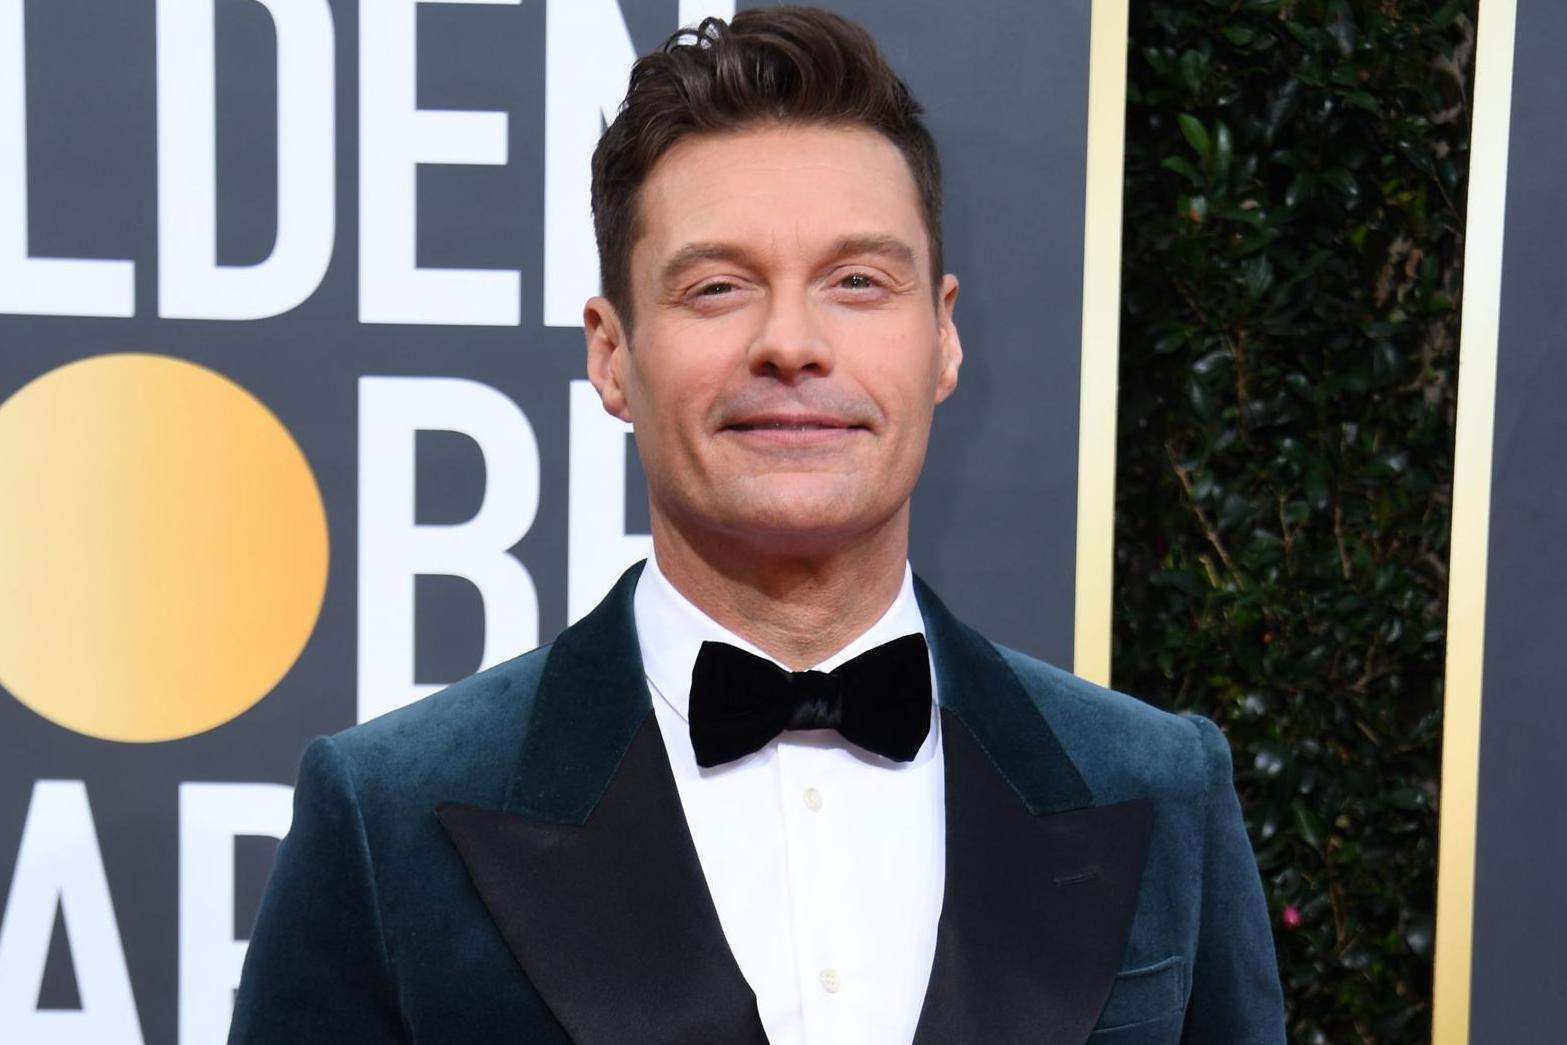 Ryan Seacrest denies suffering a stroke during American Idol finale after &apos;worrying&apos; incident thumbnail